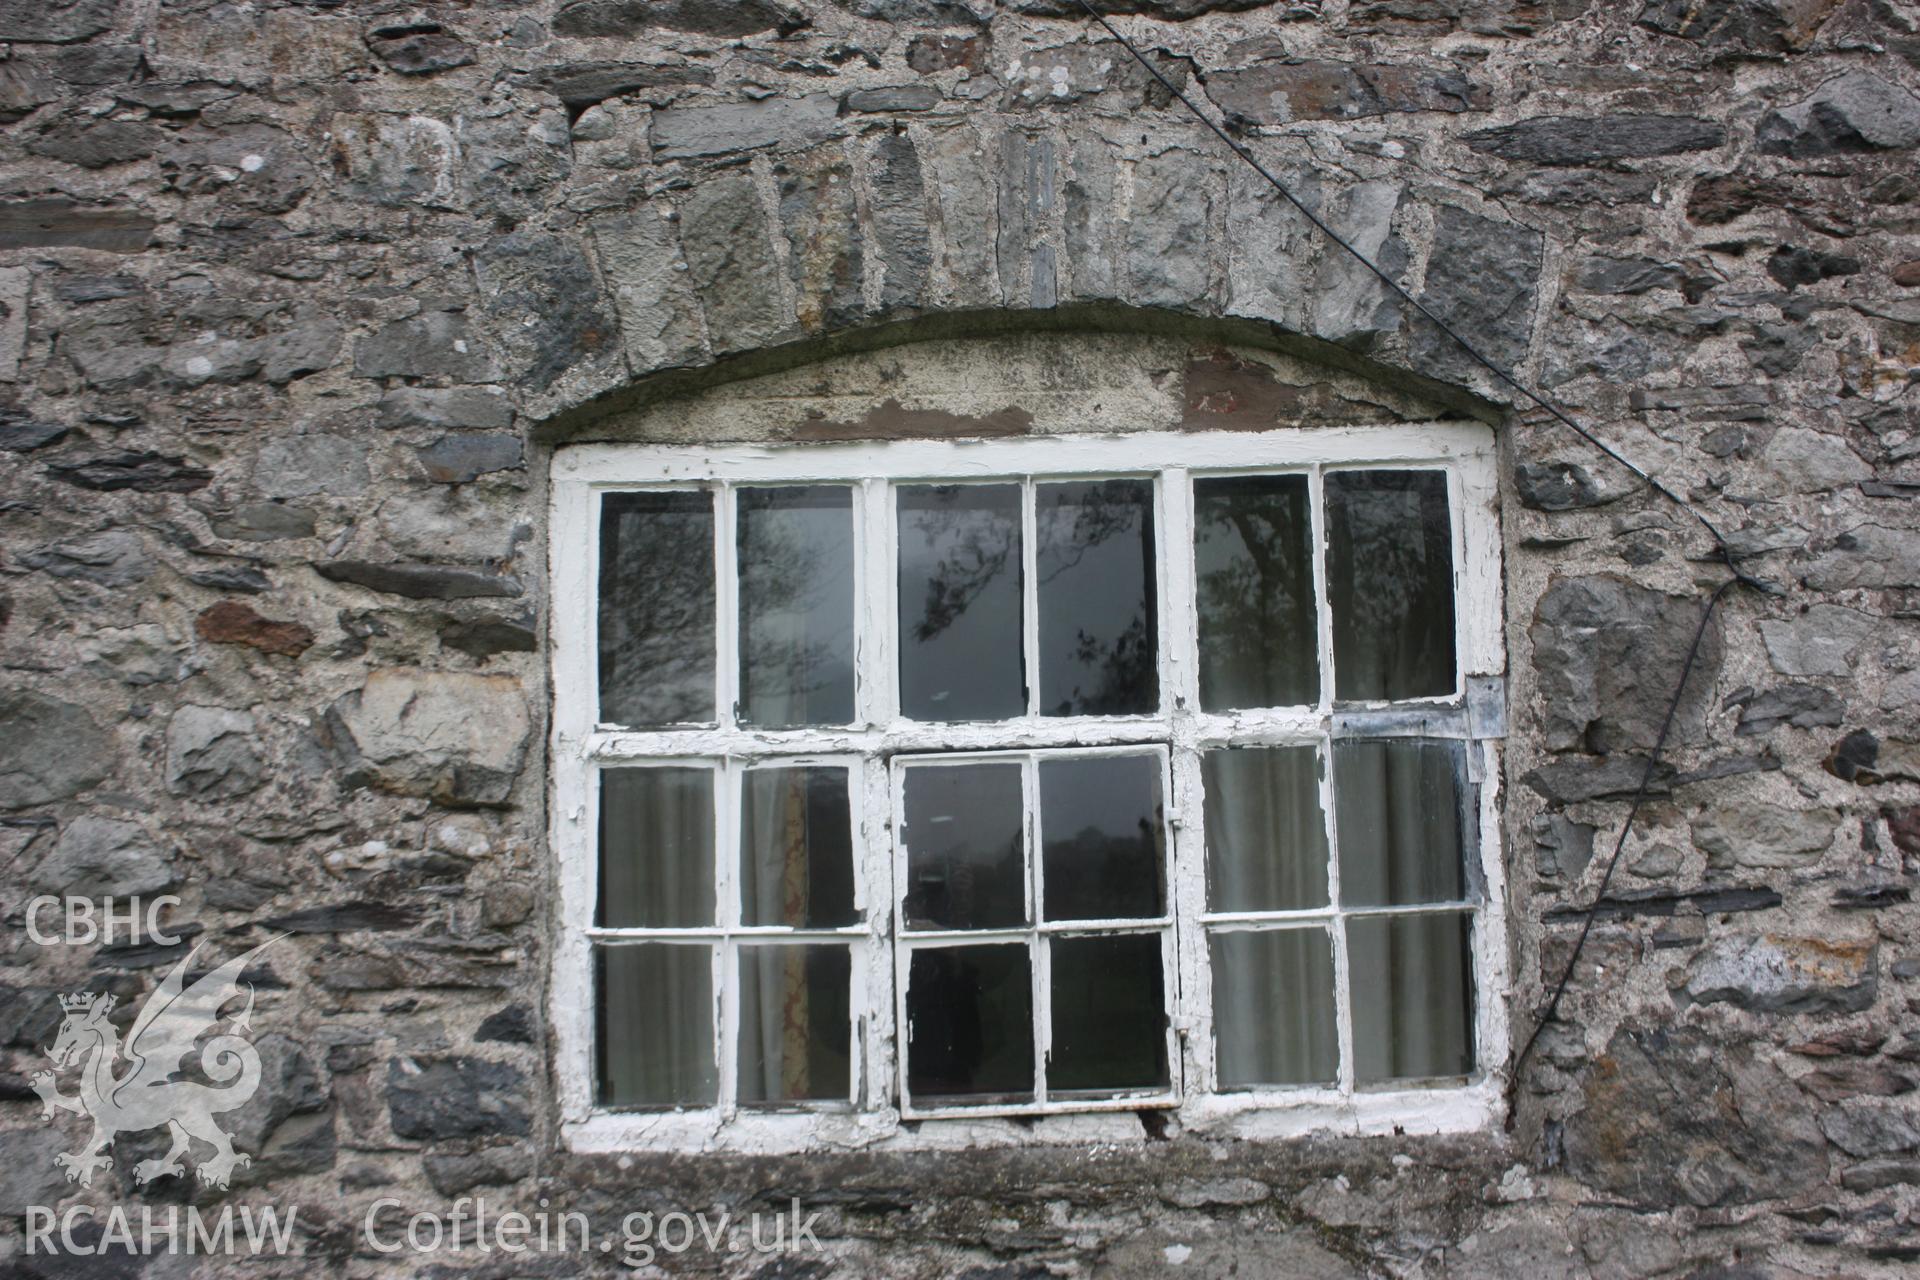 Exterior view of stone wall and glass paned window with wooden frame. Photographic survey of Glanhafon-Fawr Farmstead conducted by Geoff Ward on 4th November 2010.